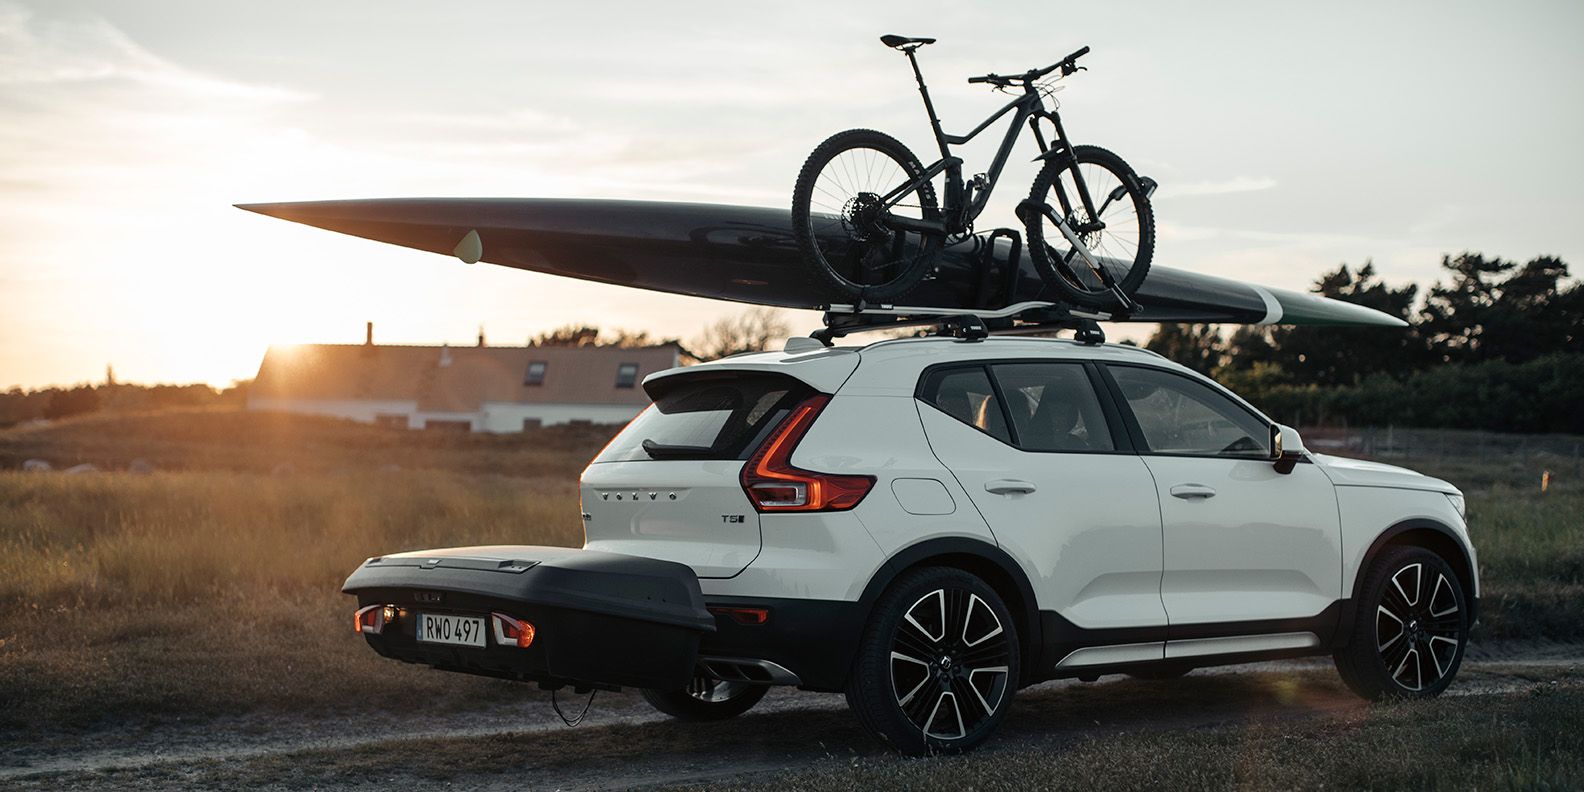 A car driving down a road at sunset with a Thule Arcos cargo box on the back and Thule bike racks on the top carrying a surfboard and bike.